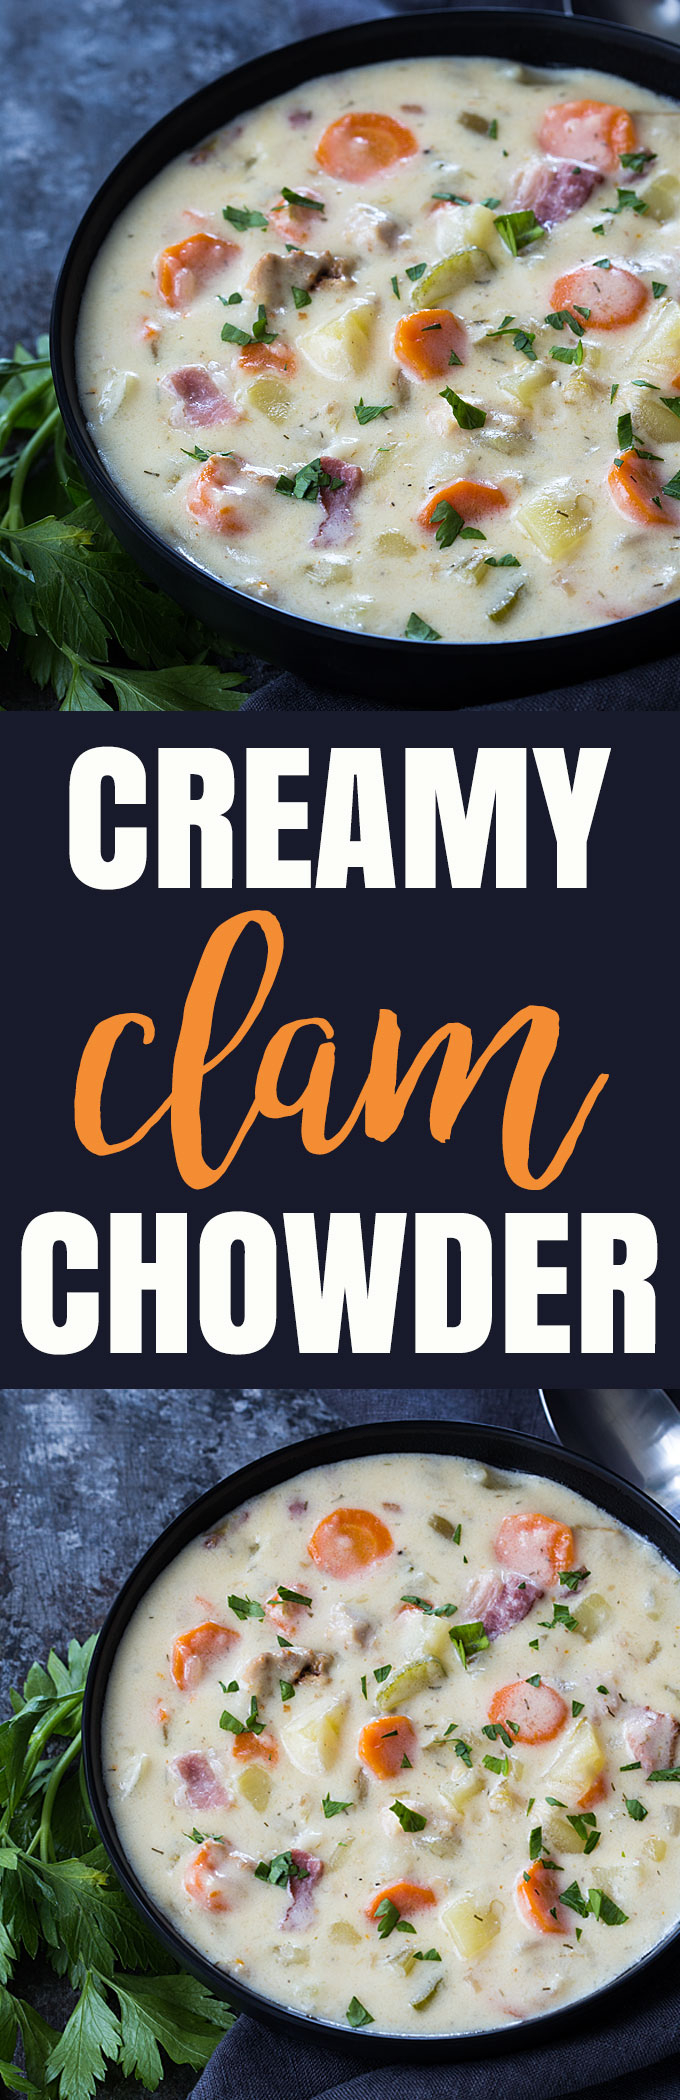 A two image vertical collage of creamy clam chowder with overlay text in the center.